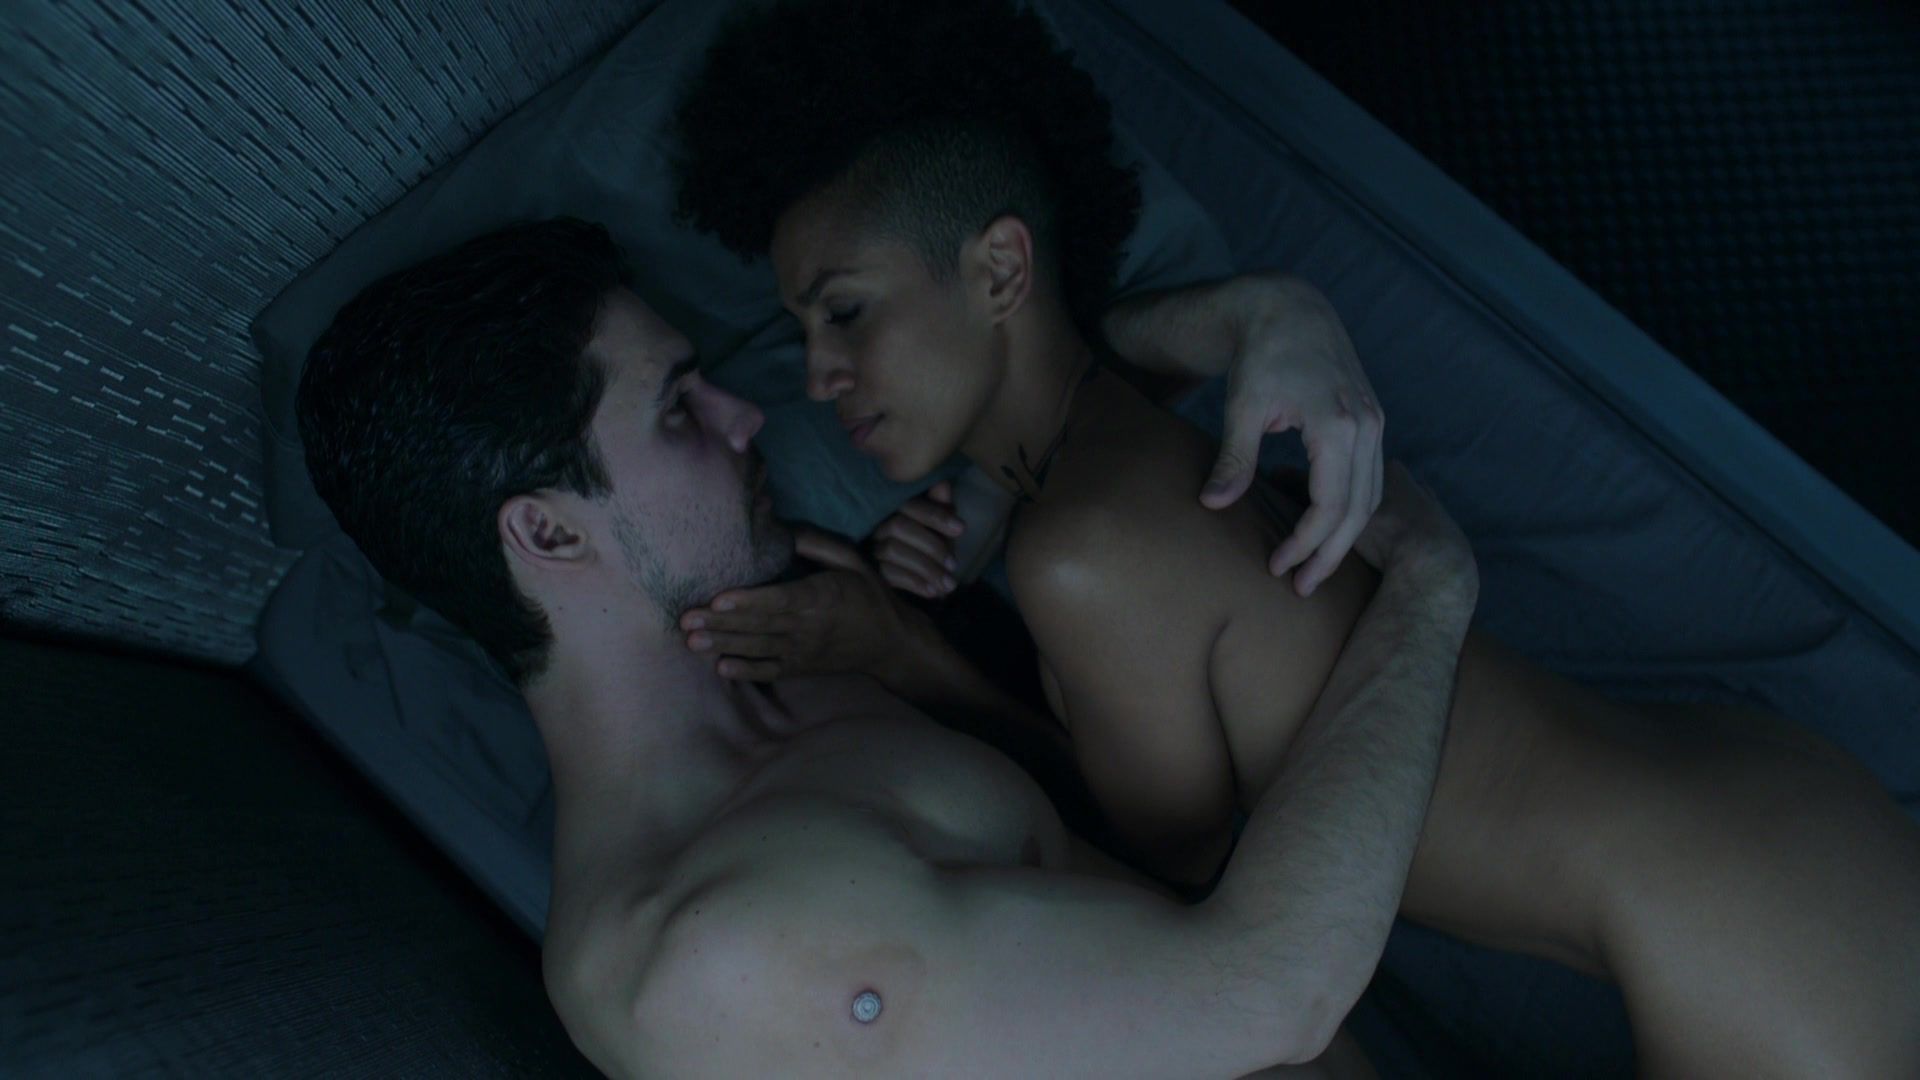 FrenchGFs Dominique Tipper nude - The Expanse s03e06 (2018) IAFD